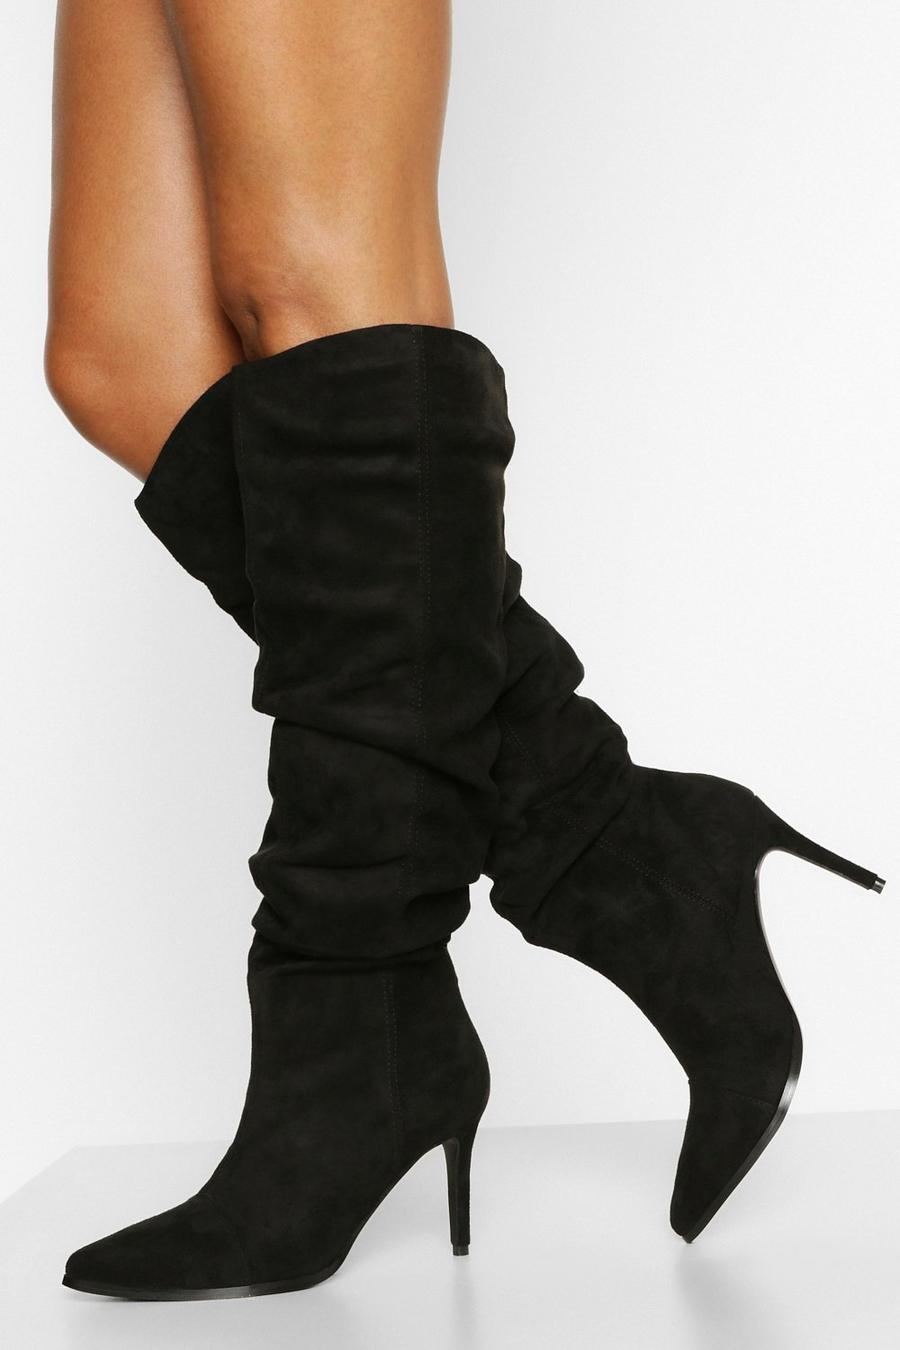 Black Slouched Stiletto Heel Knee High Boots image number 1